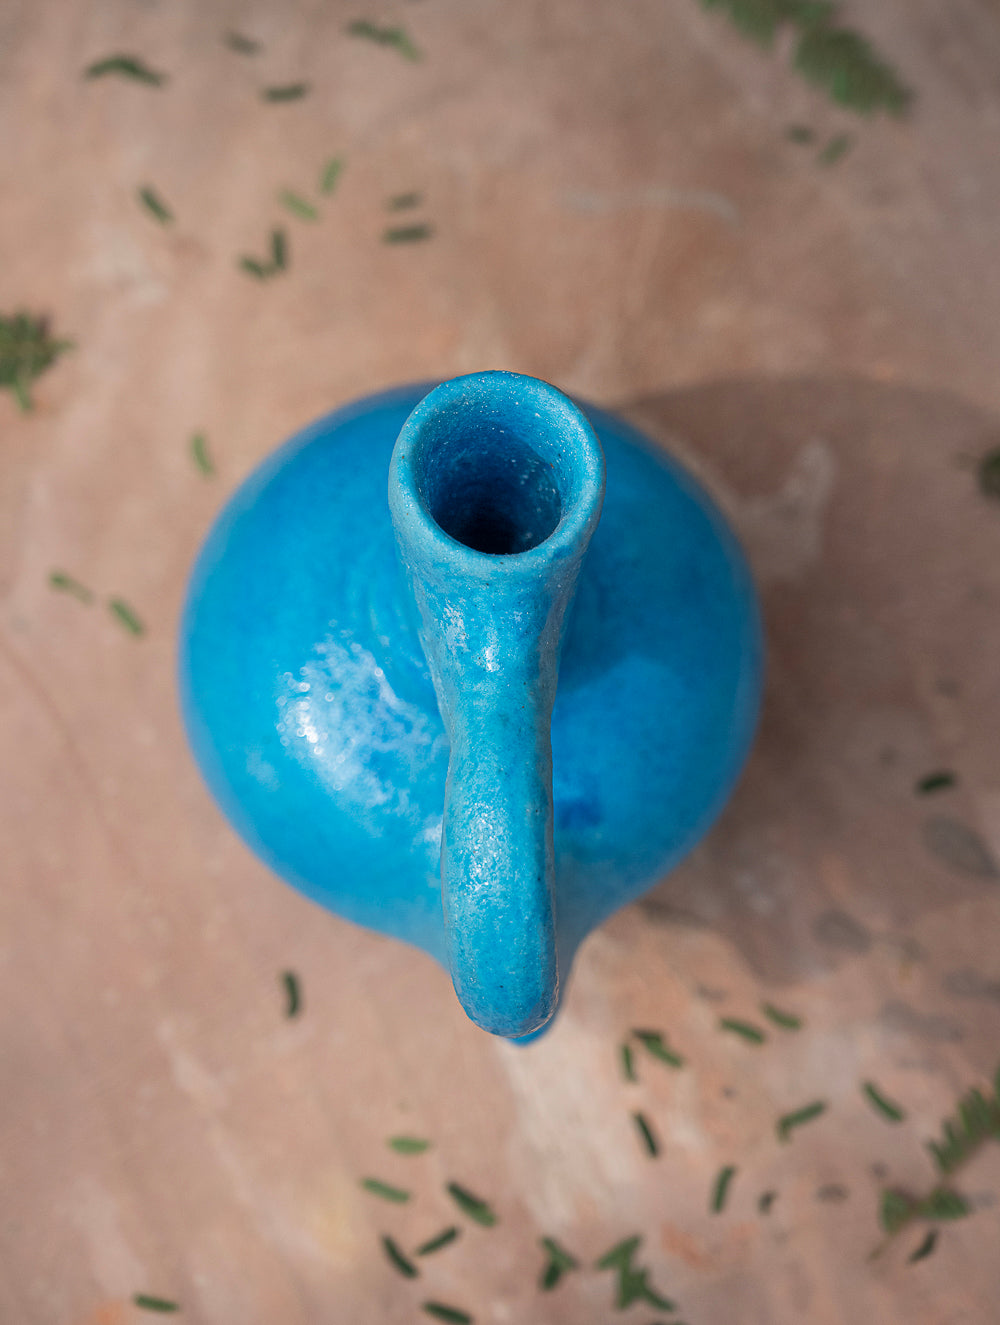 Load image into Gallery viewer, Delhi Blue Art Pottery Curio /Pitcher Vase